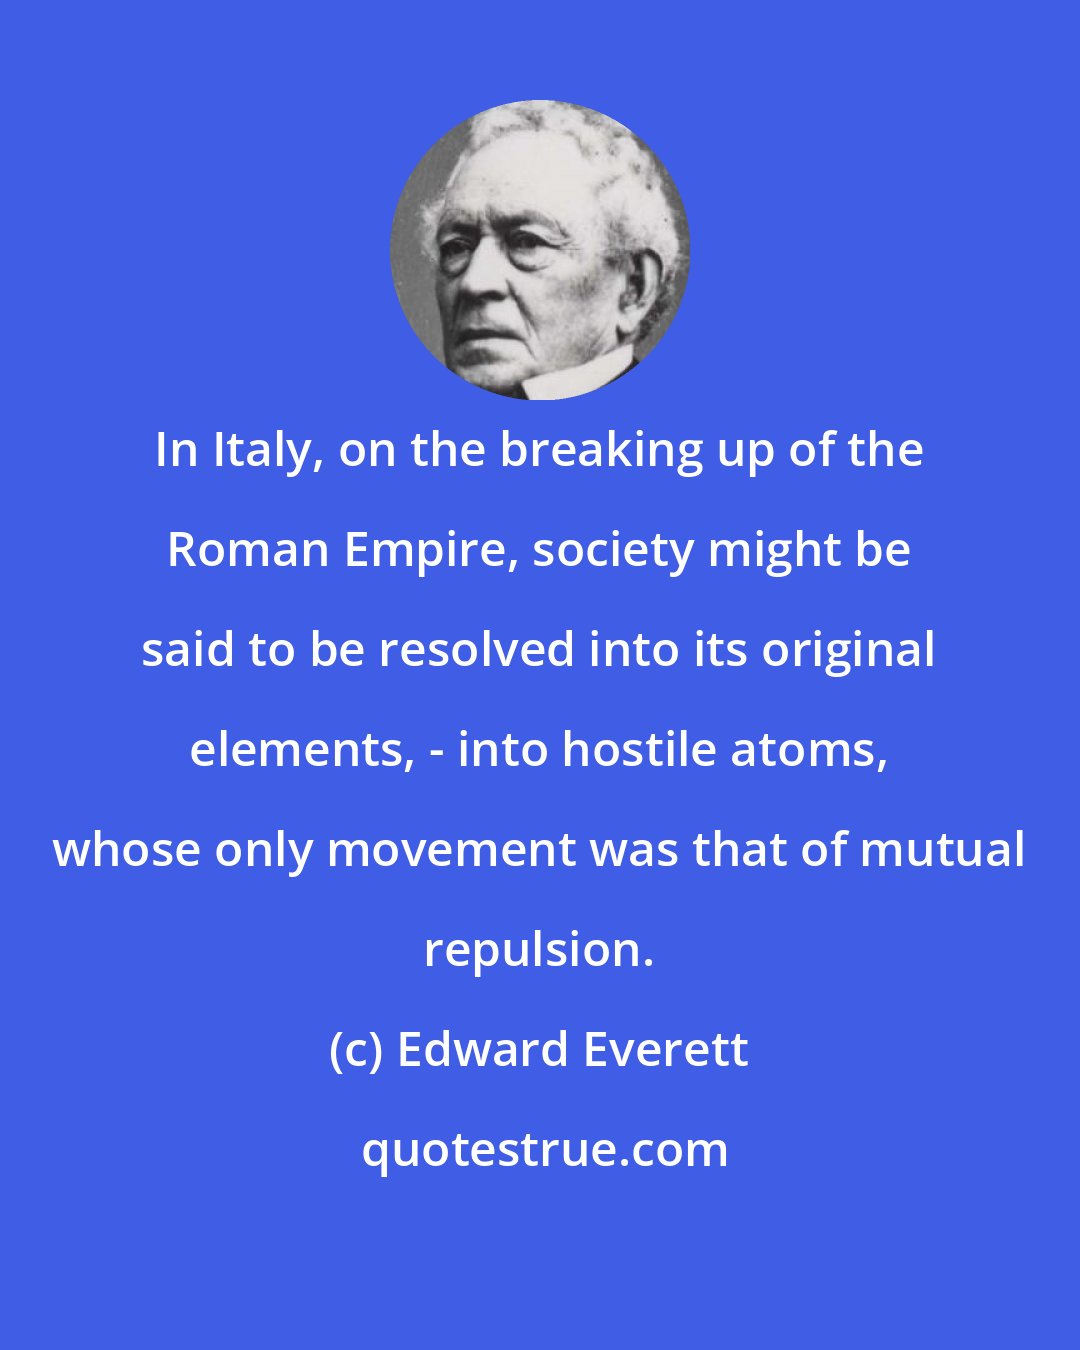 Edward Everett: In Italy, on the breaking up of the Roman Empire, society might be said to be resolved into its original elements, - into hostile atoms, whose only movement was that of mutual repulsion.